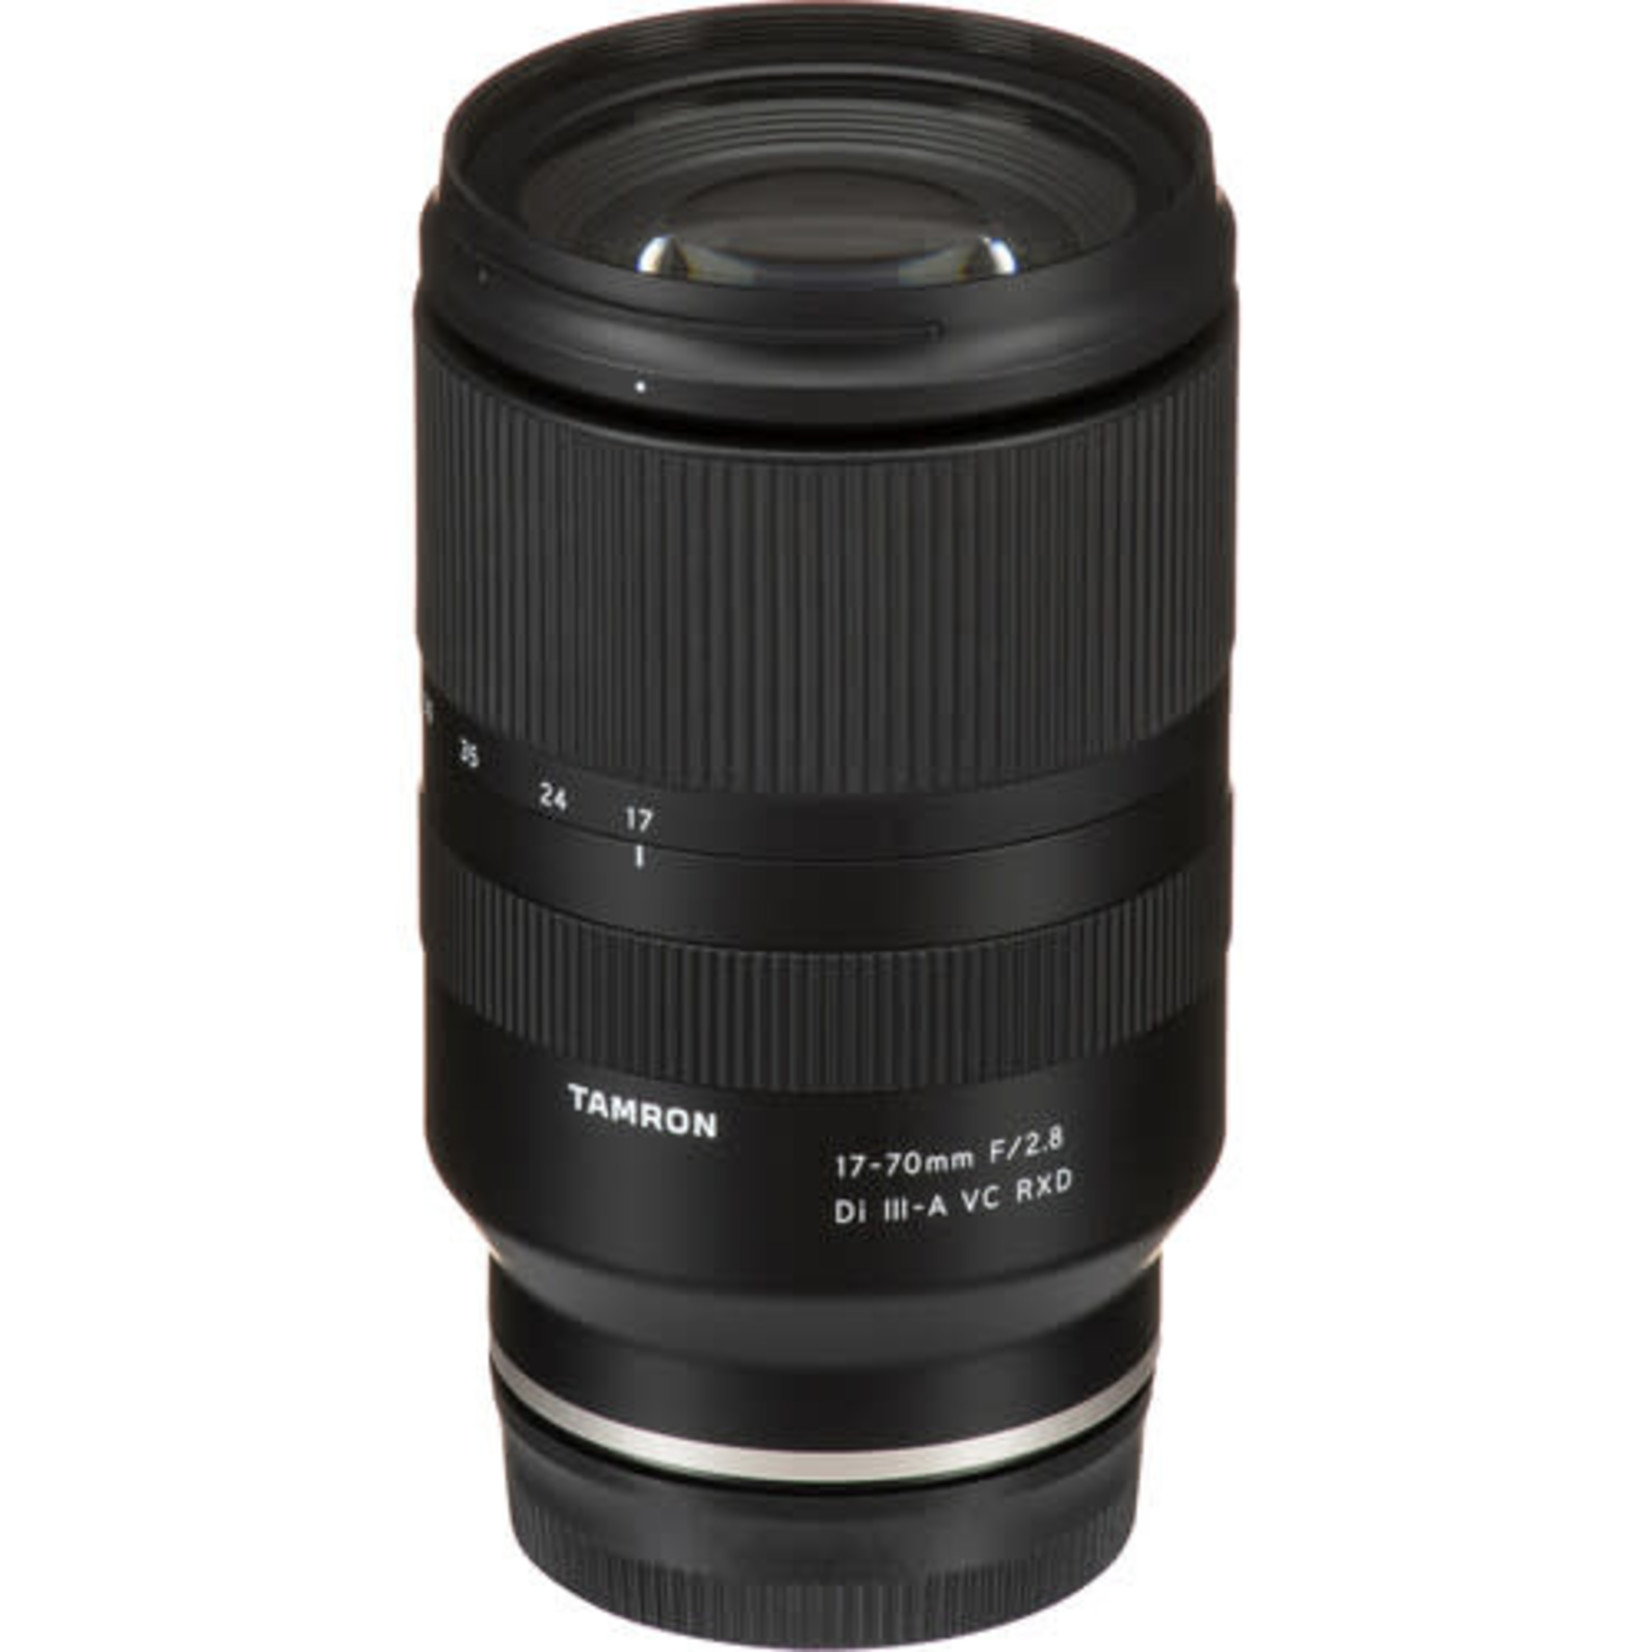 Tamron 17-70mm f/2.8 Di III-A VC RXD Lens for Sony E - Stewarts Photo